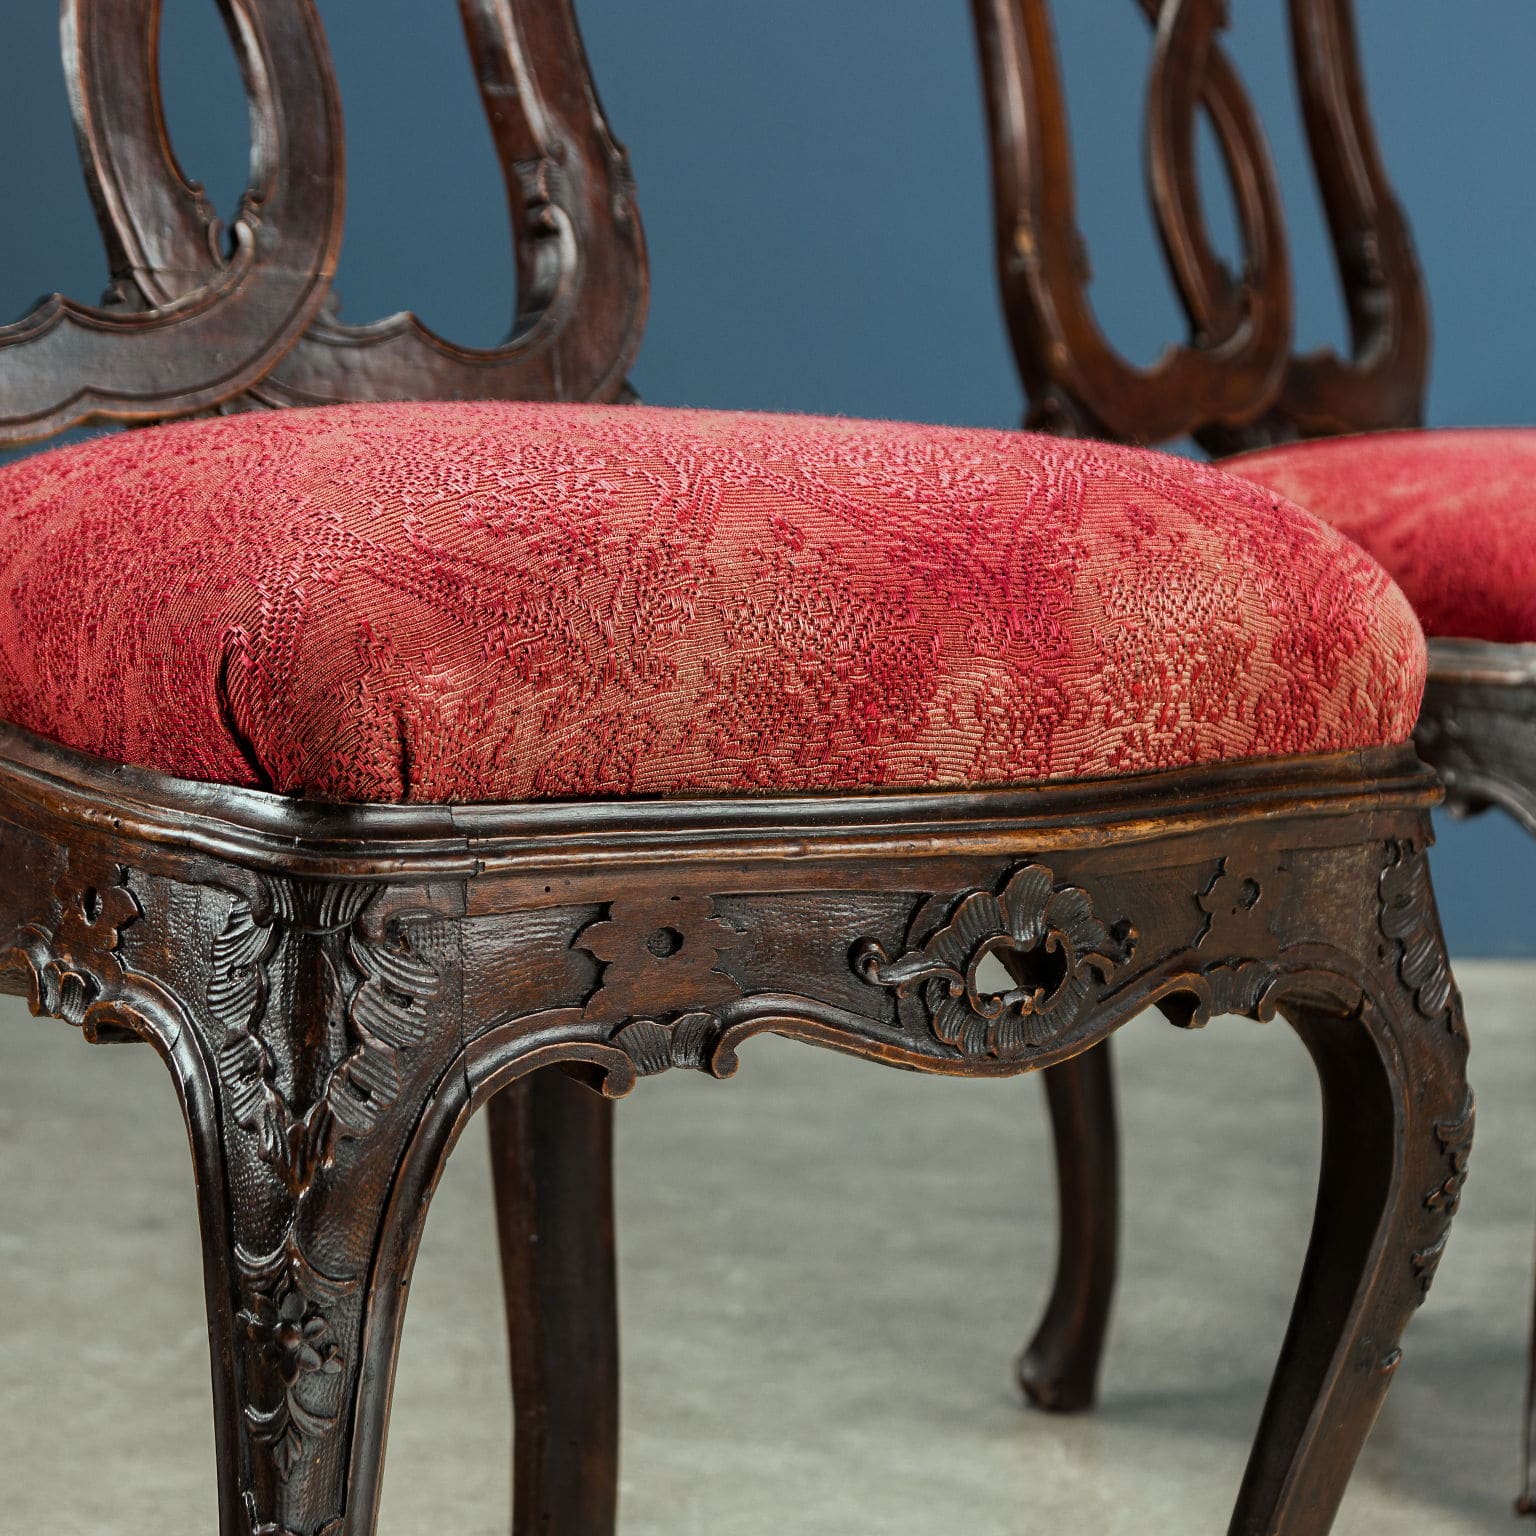 baroque chairs